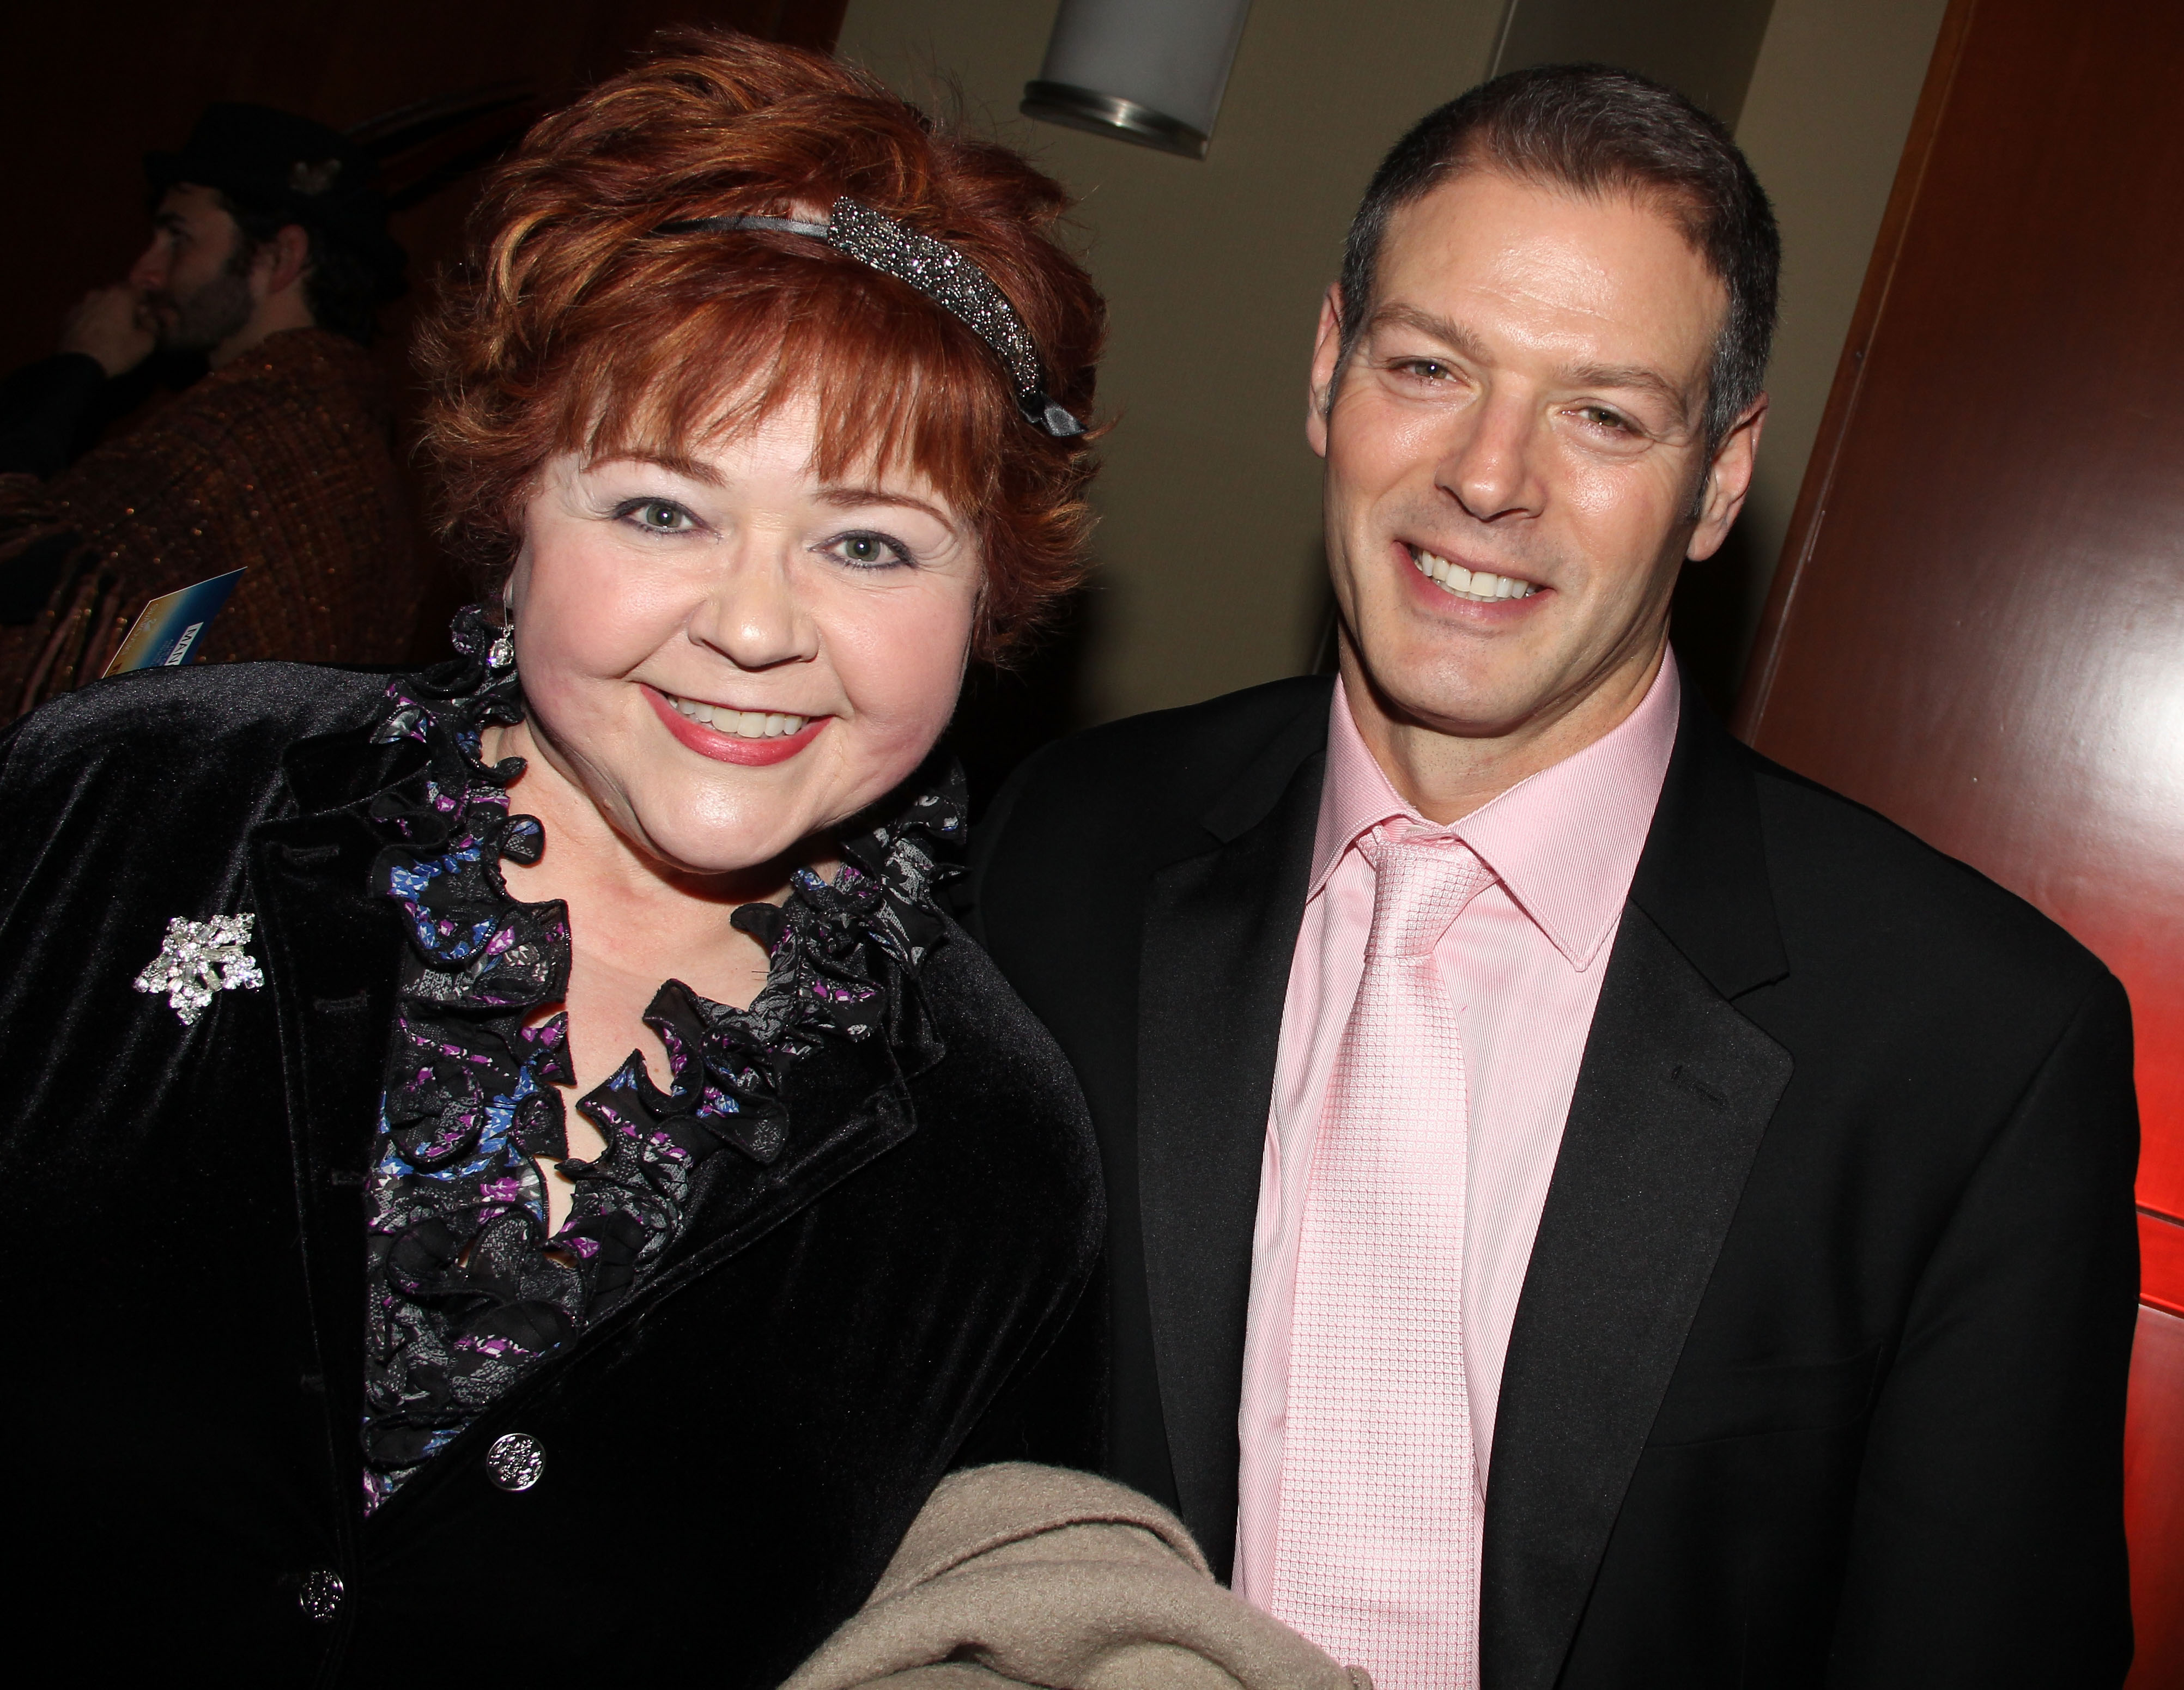 'Days of Our Lives' actor Patrika Darbo in a black dress and Kevin Spirtas in a black suit pose together for a photo.